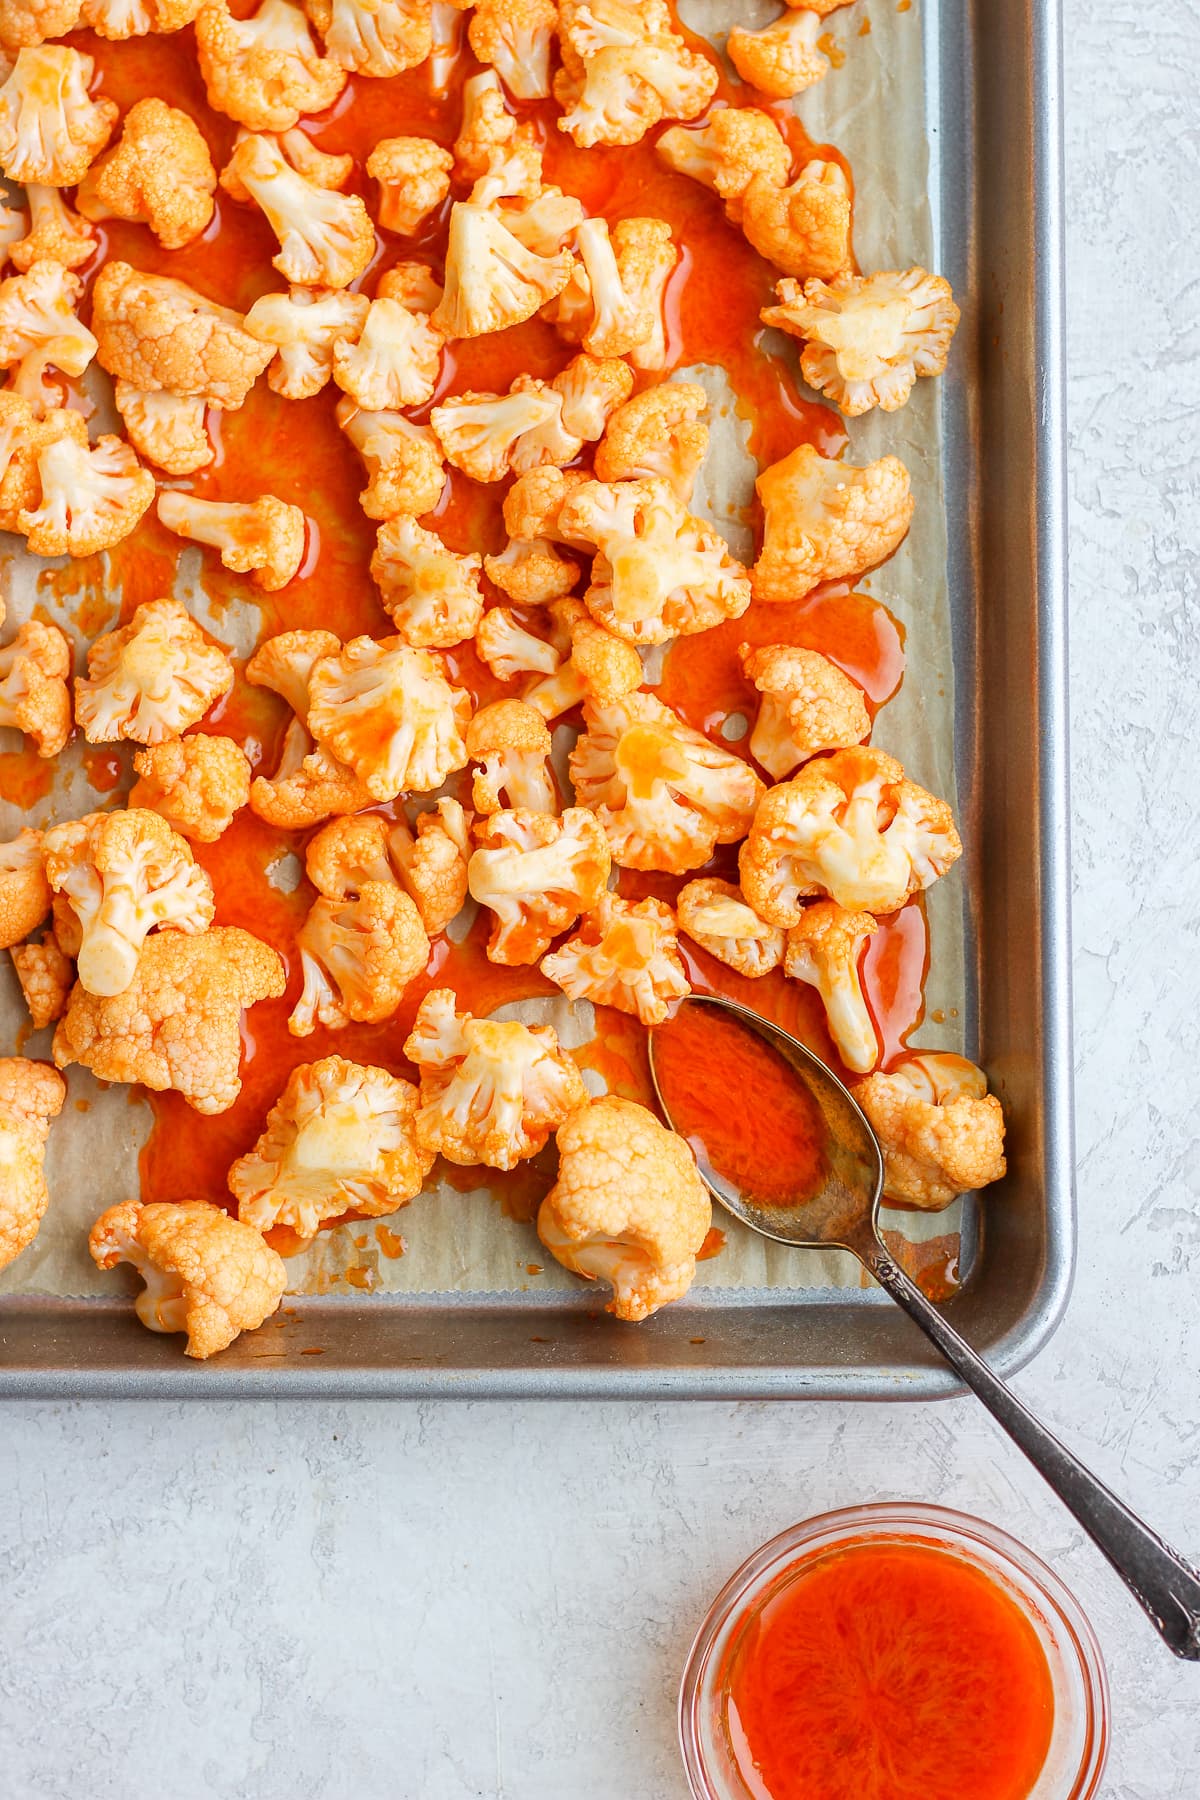 Cauliflower covered in buffalo sauce on a parchment-lined baking sheet.